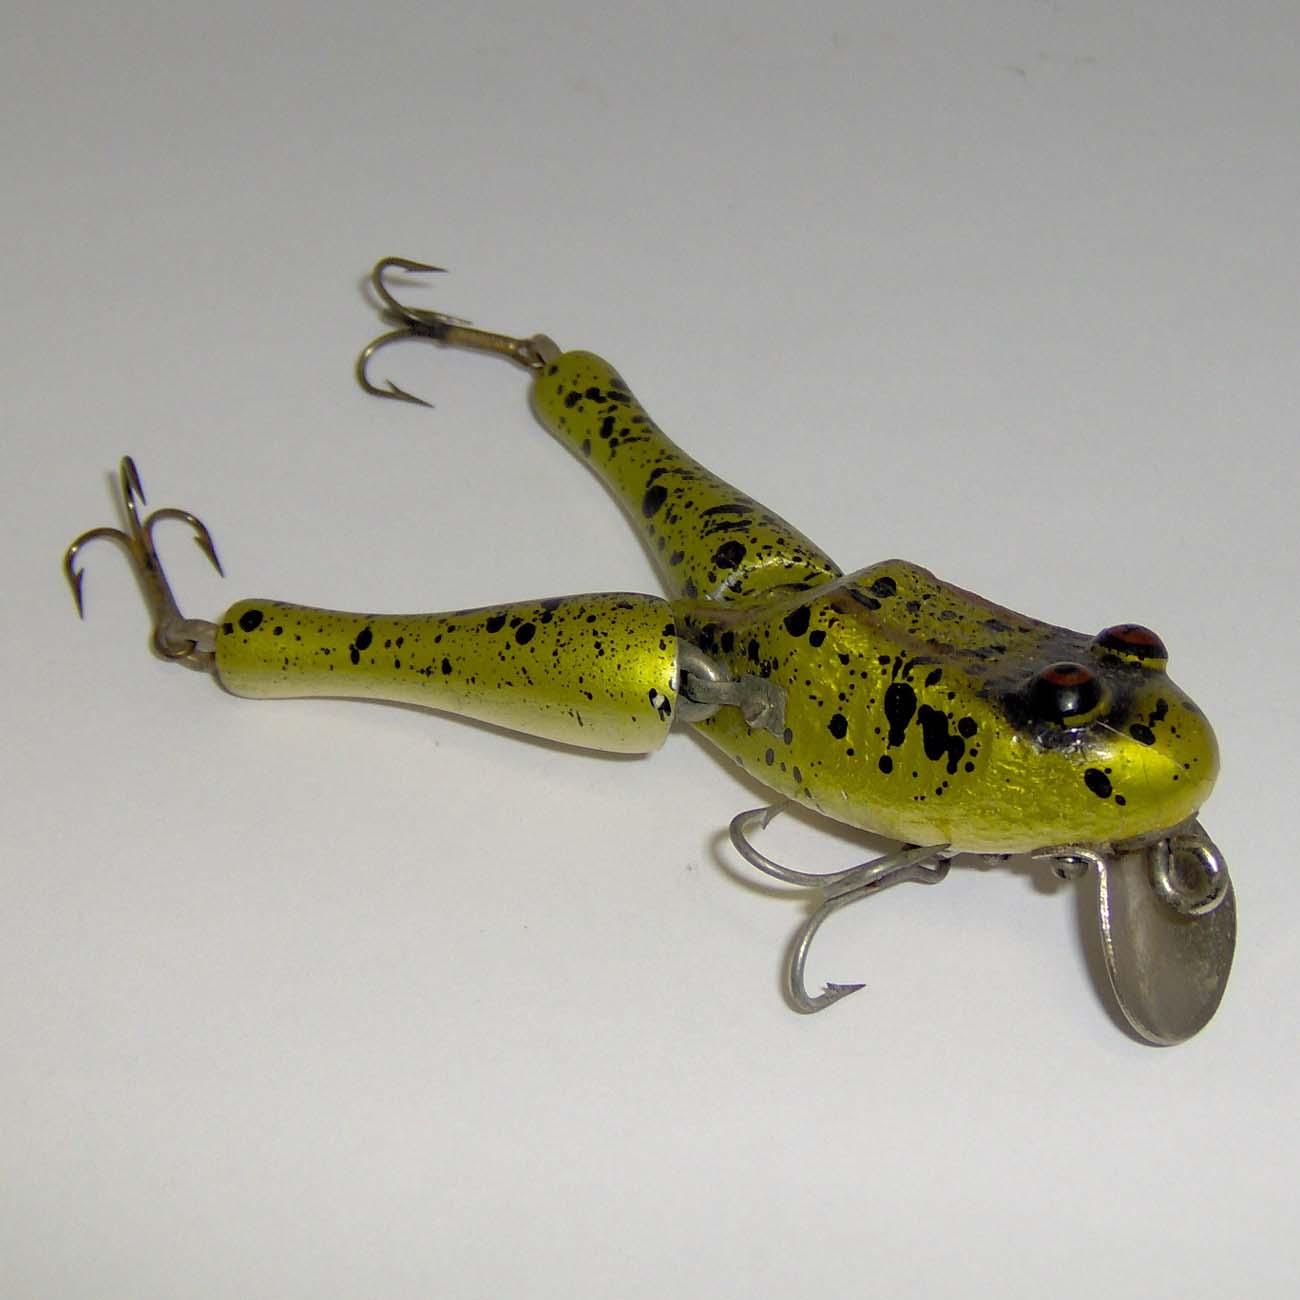 VINTAGE PAW PAW BAIT CO. WOTTA FROG WOOD FISHING LURE - REALLY